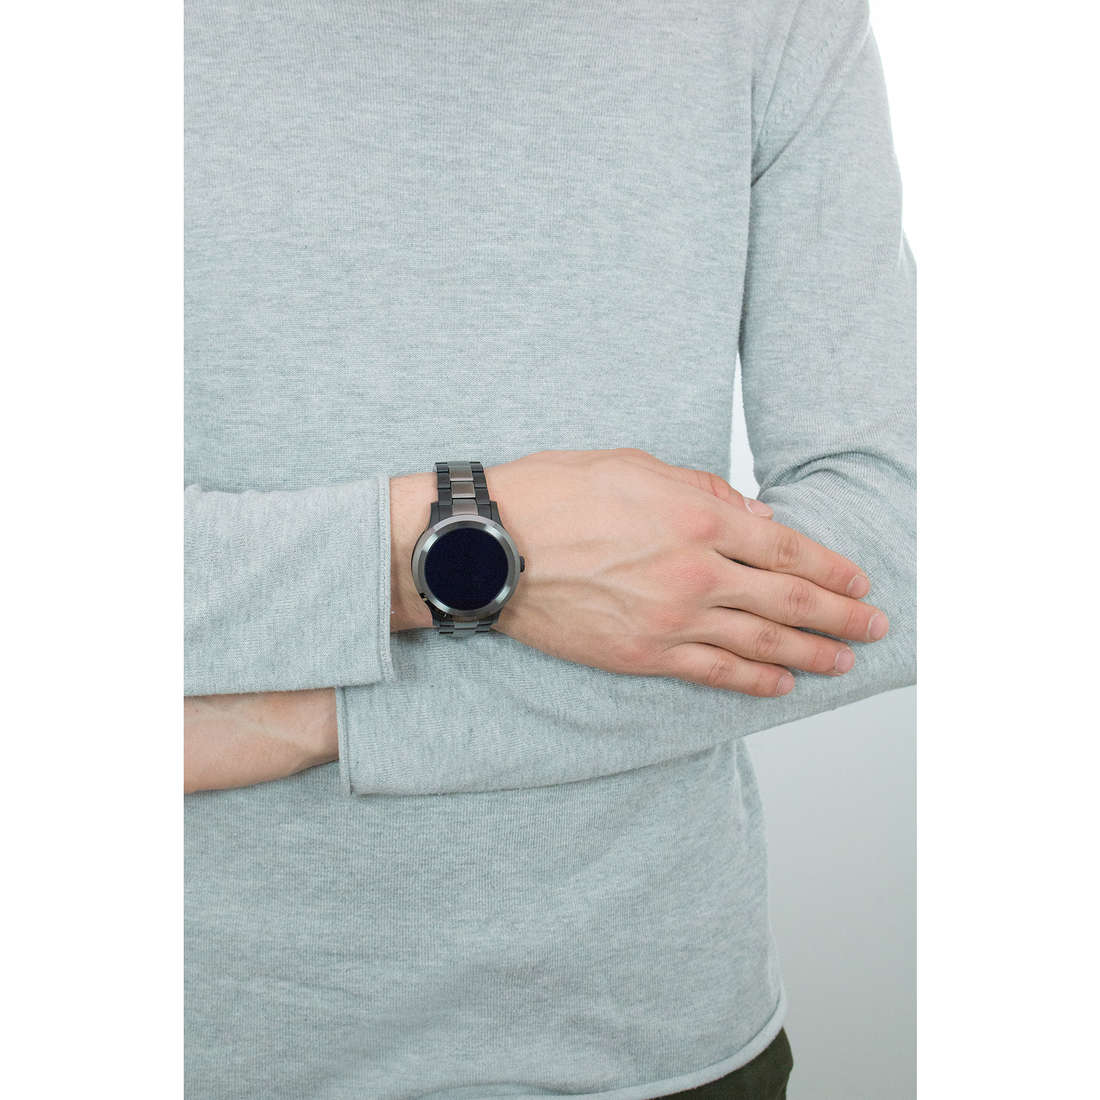 Fossil Smartwatches Q Founder uomo FTW2117 indosso